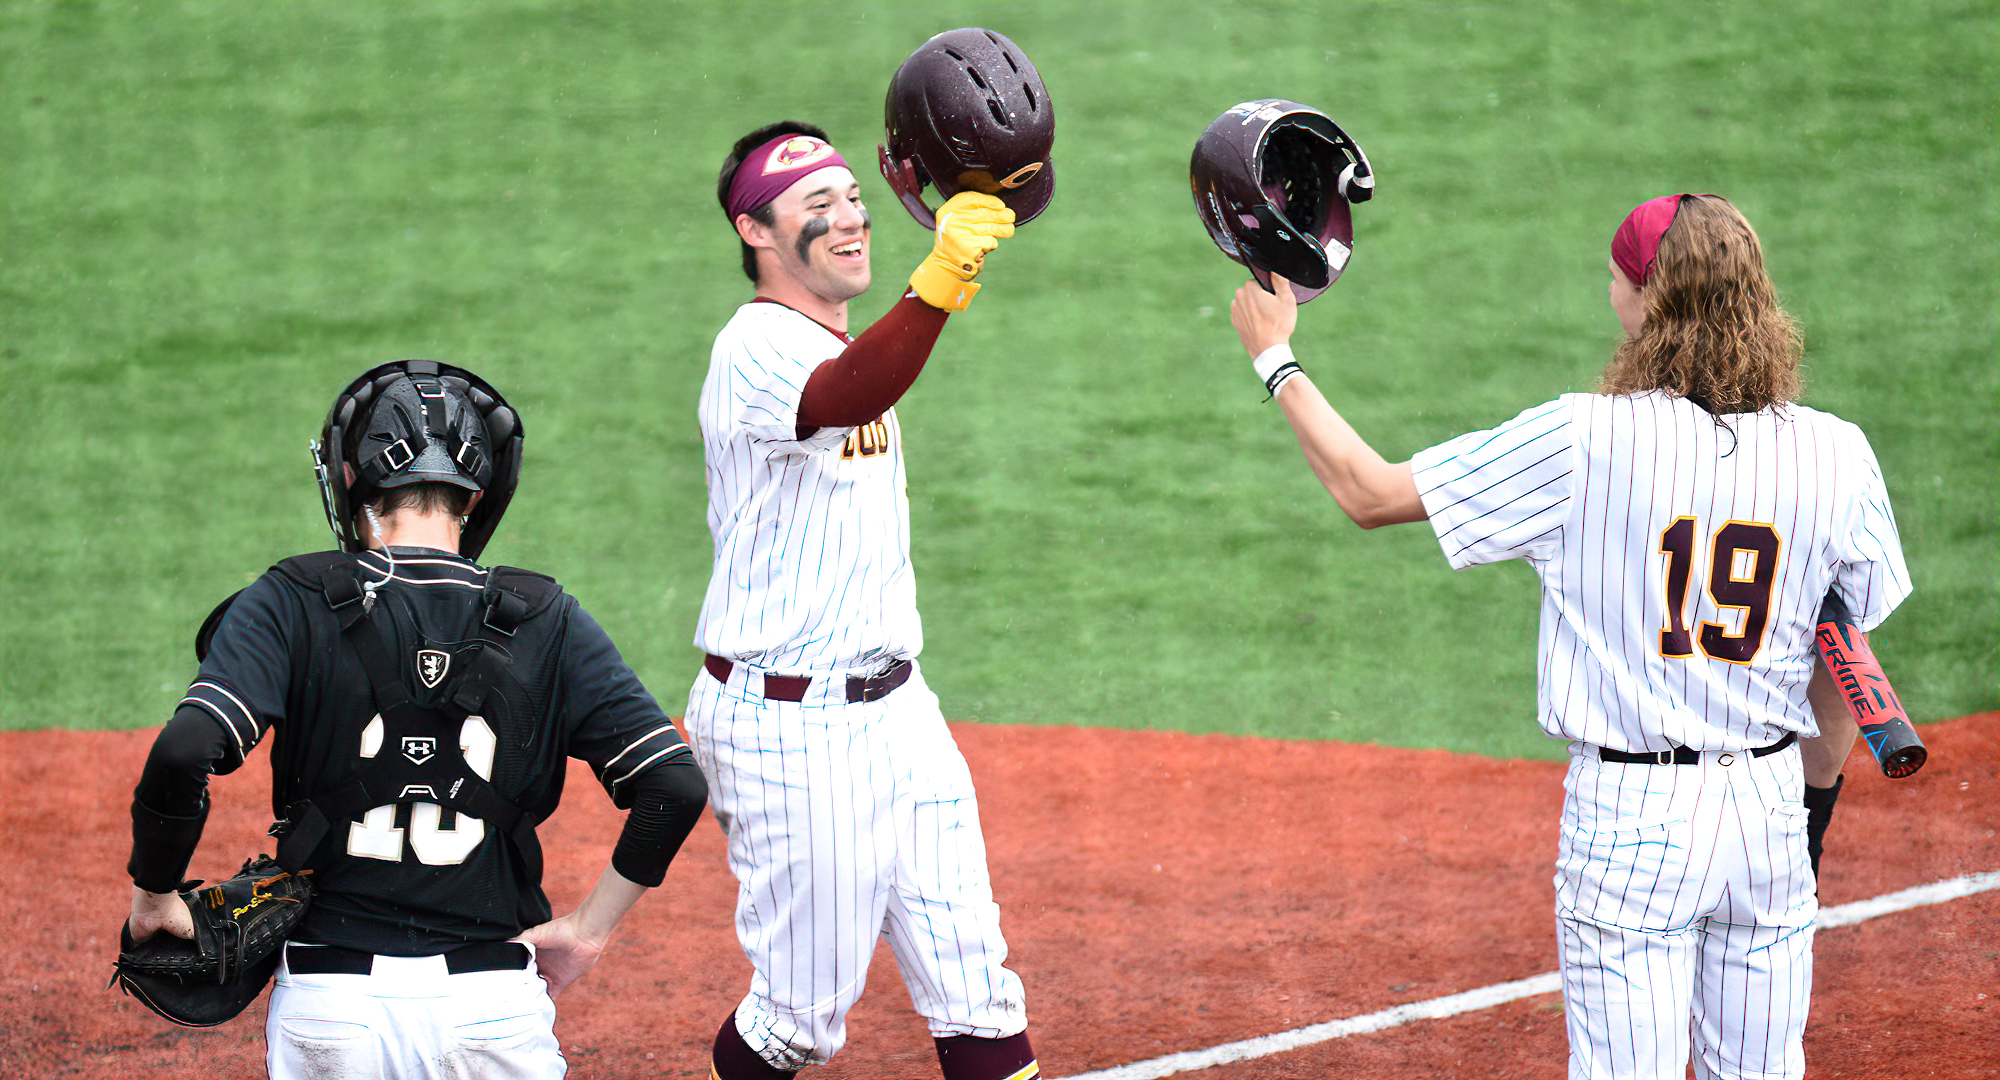 Justin Kloster (L) is congratulated by Max Boran after Kloster cranked out a 2-run home run in the eighth inning of Game 2 against St. Olaf.